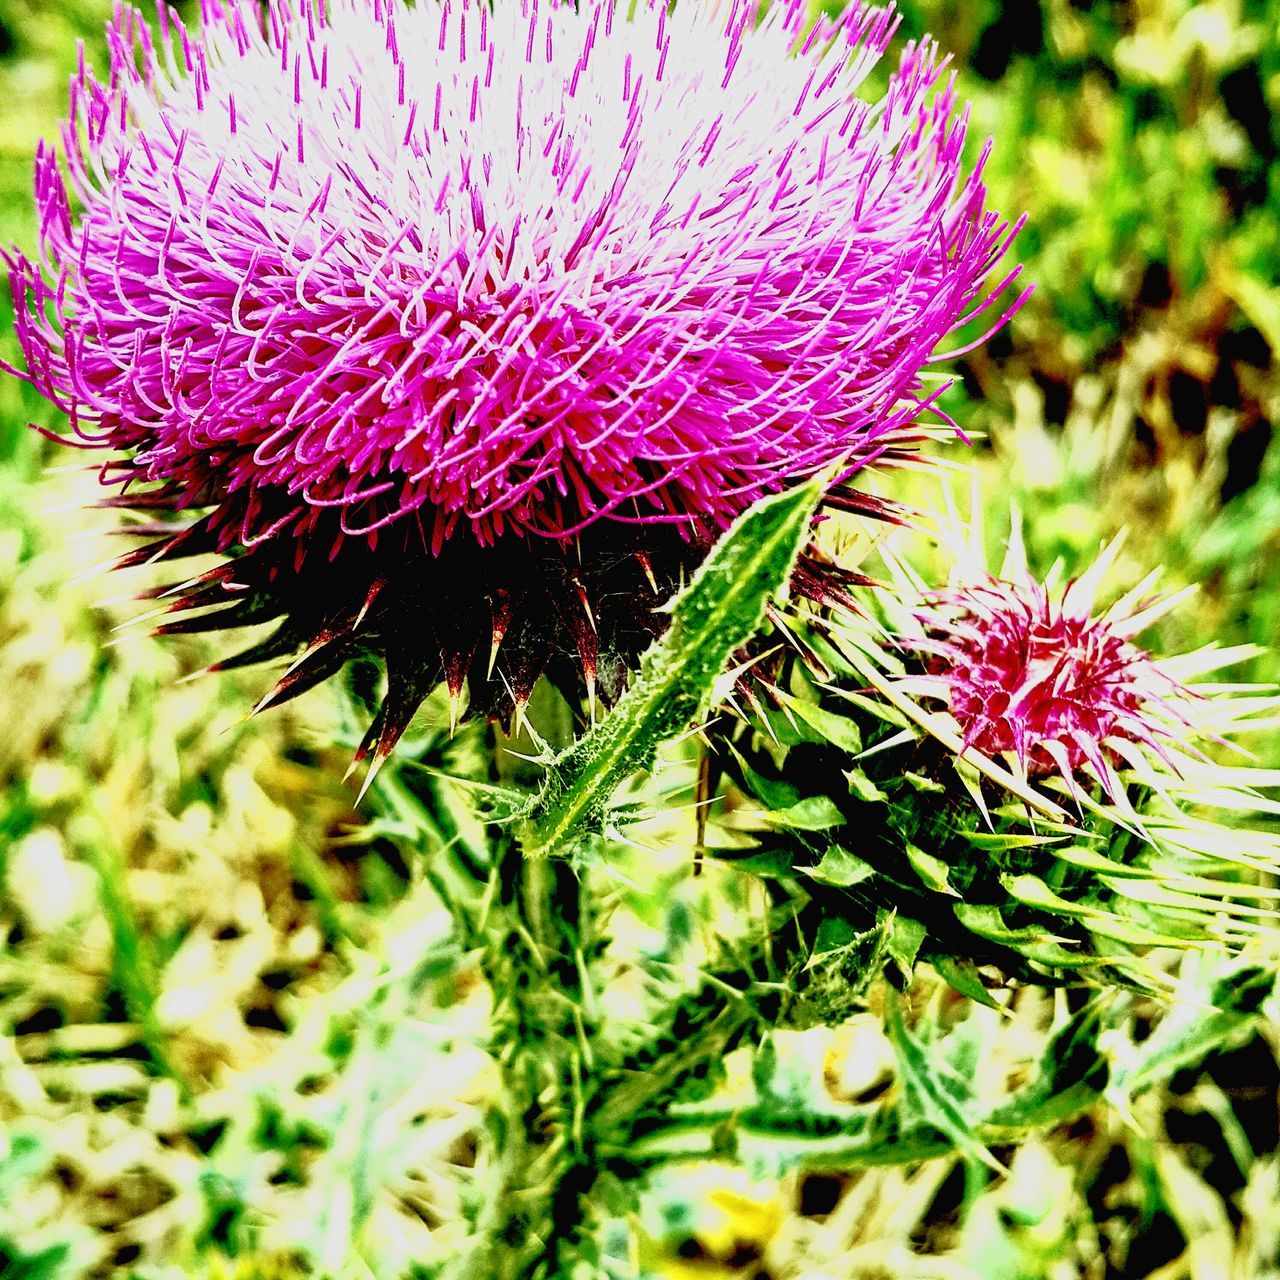 flower, growth, fragility, freshness, close-up, beauty in nature, focus on foreground, plant, flower head, pink color, nature, petal, blooming, thistle, selective focus, outdoors, purple, single flower, day, in bloom